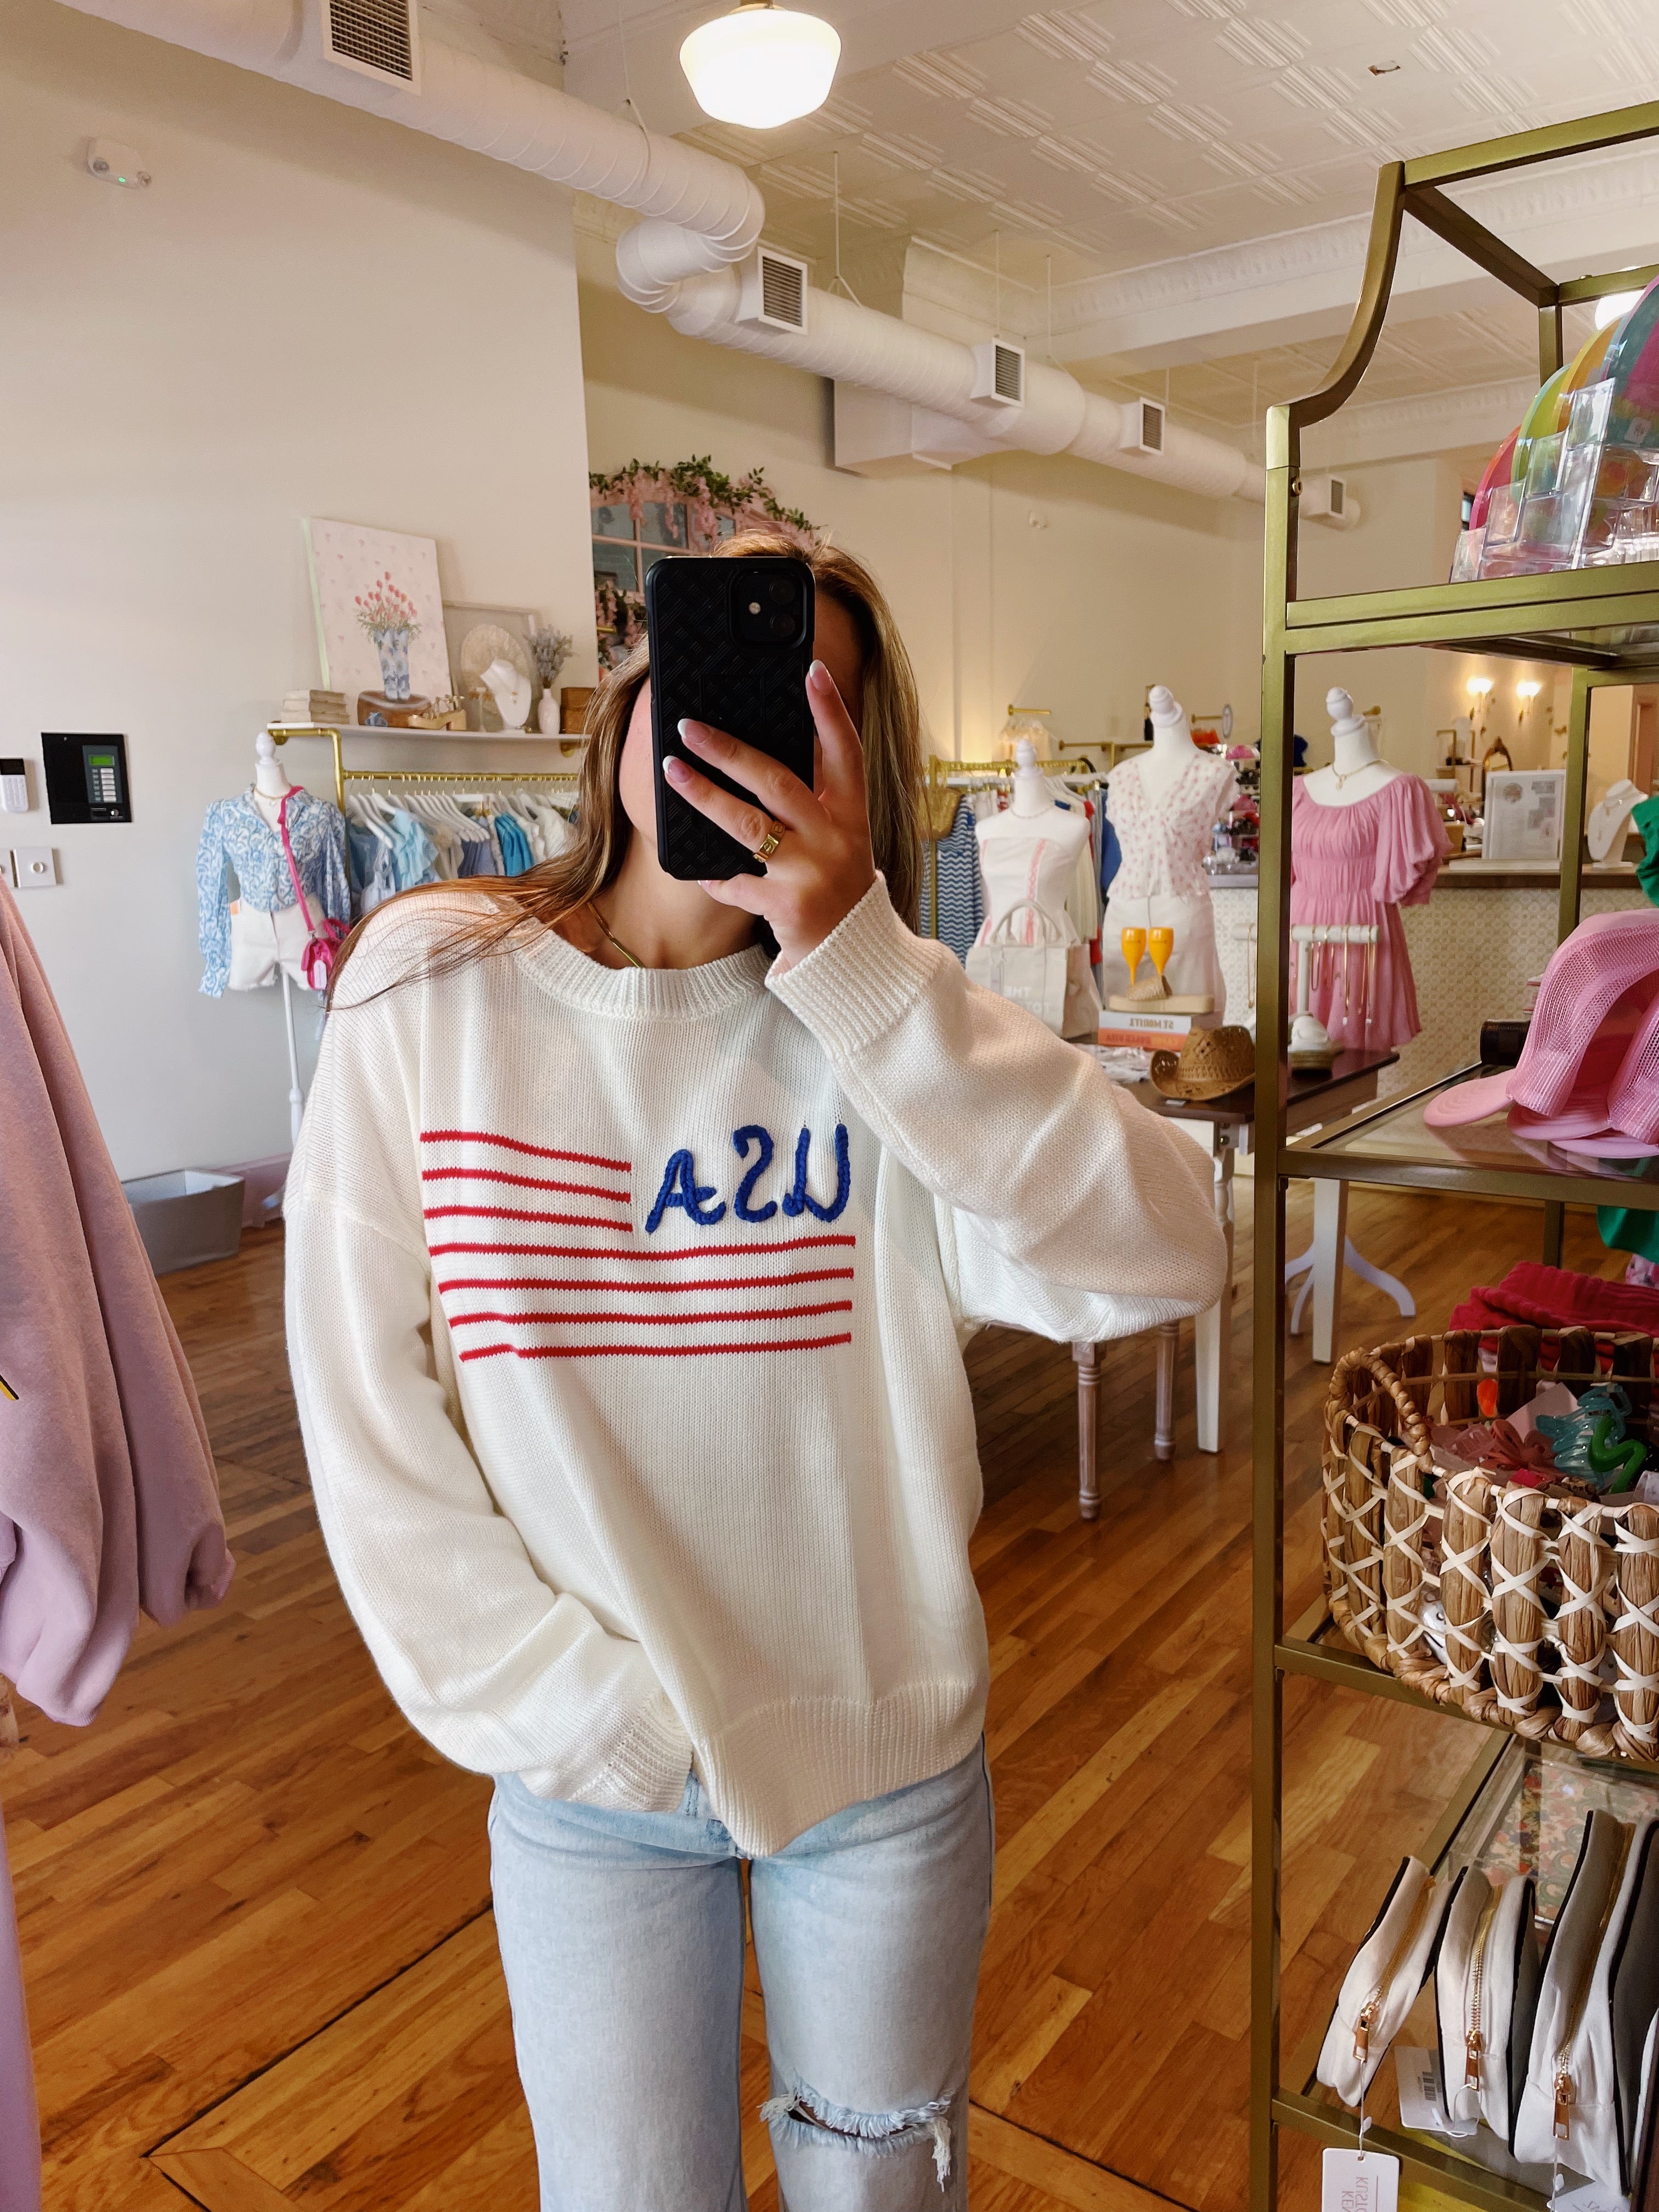 Party In The USA Sweater Top - White